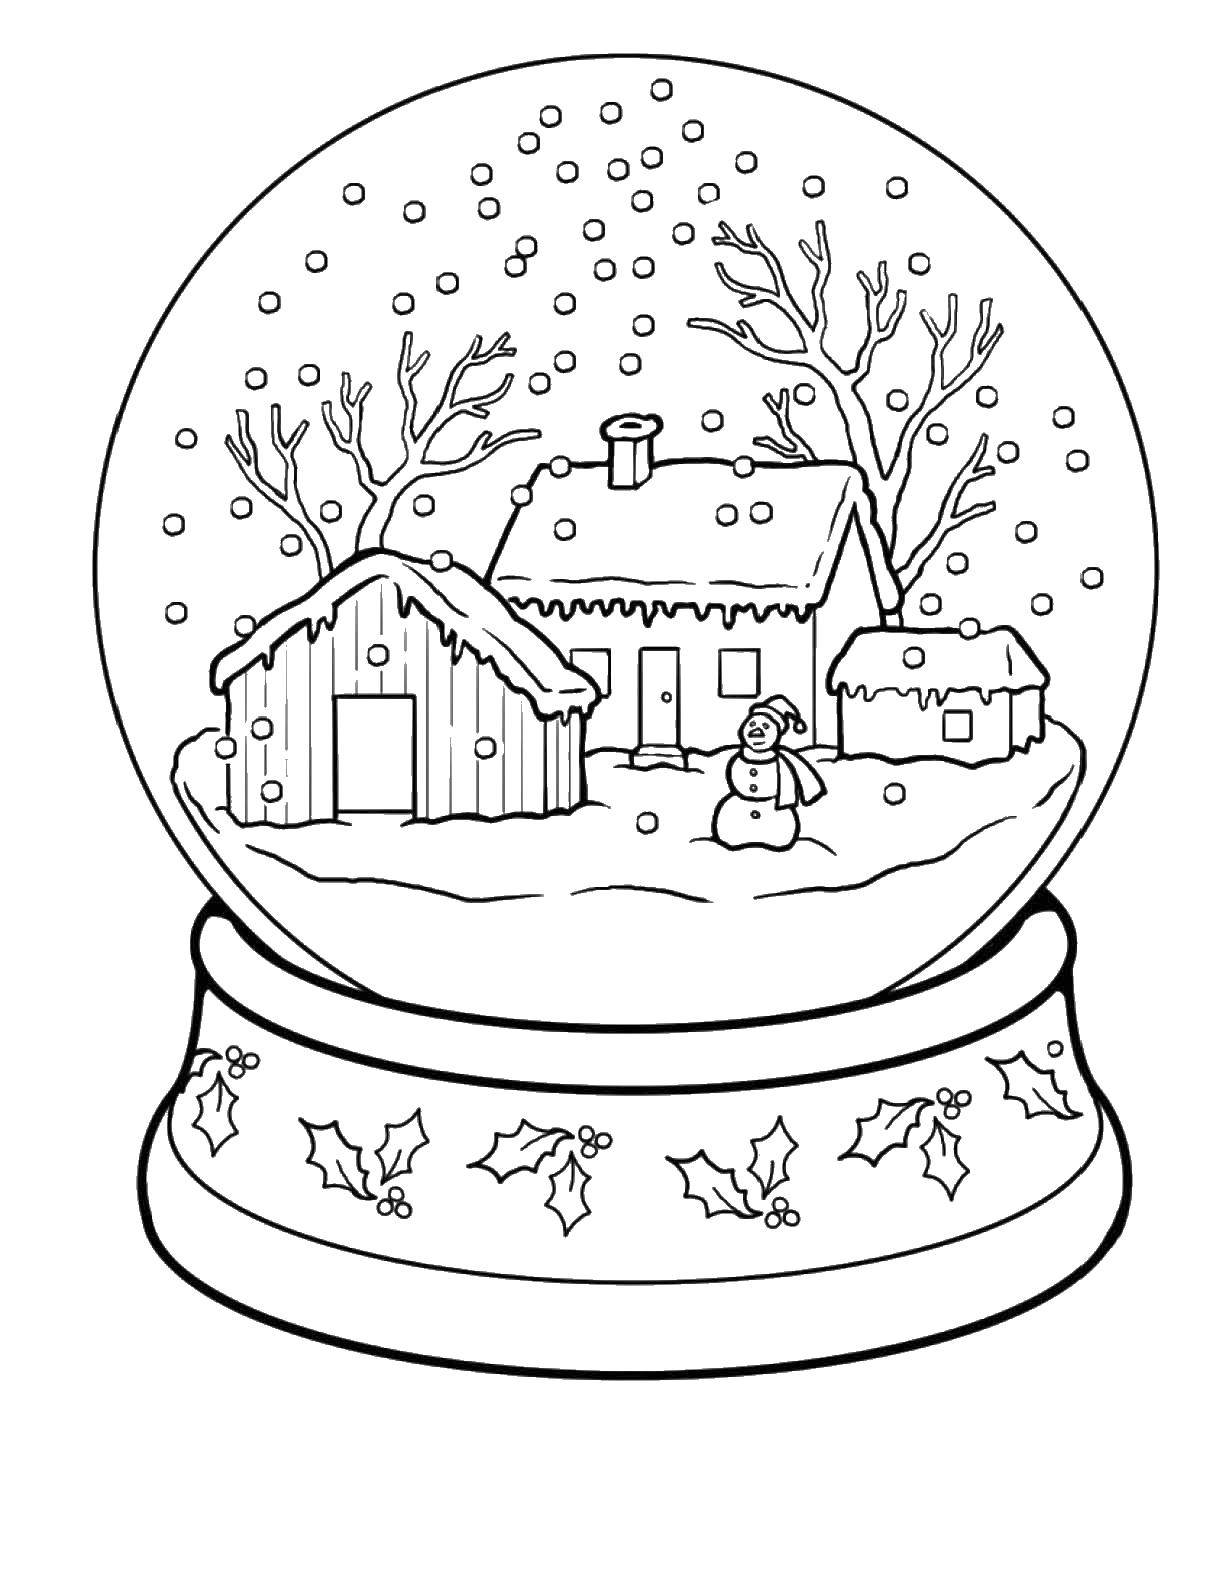 Coloring Ball with houses inside. Category winter. Tags:  house, winter, balloon.